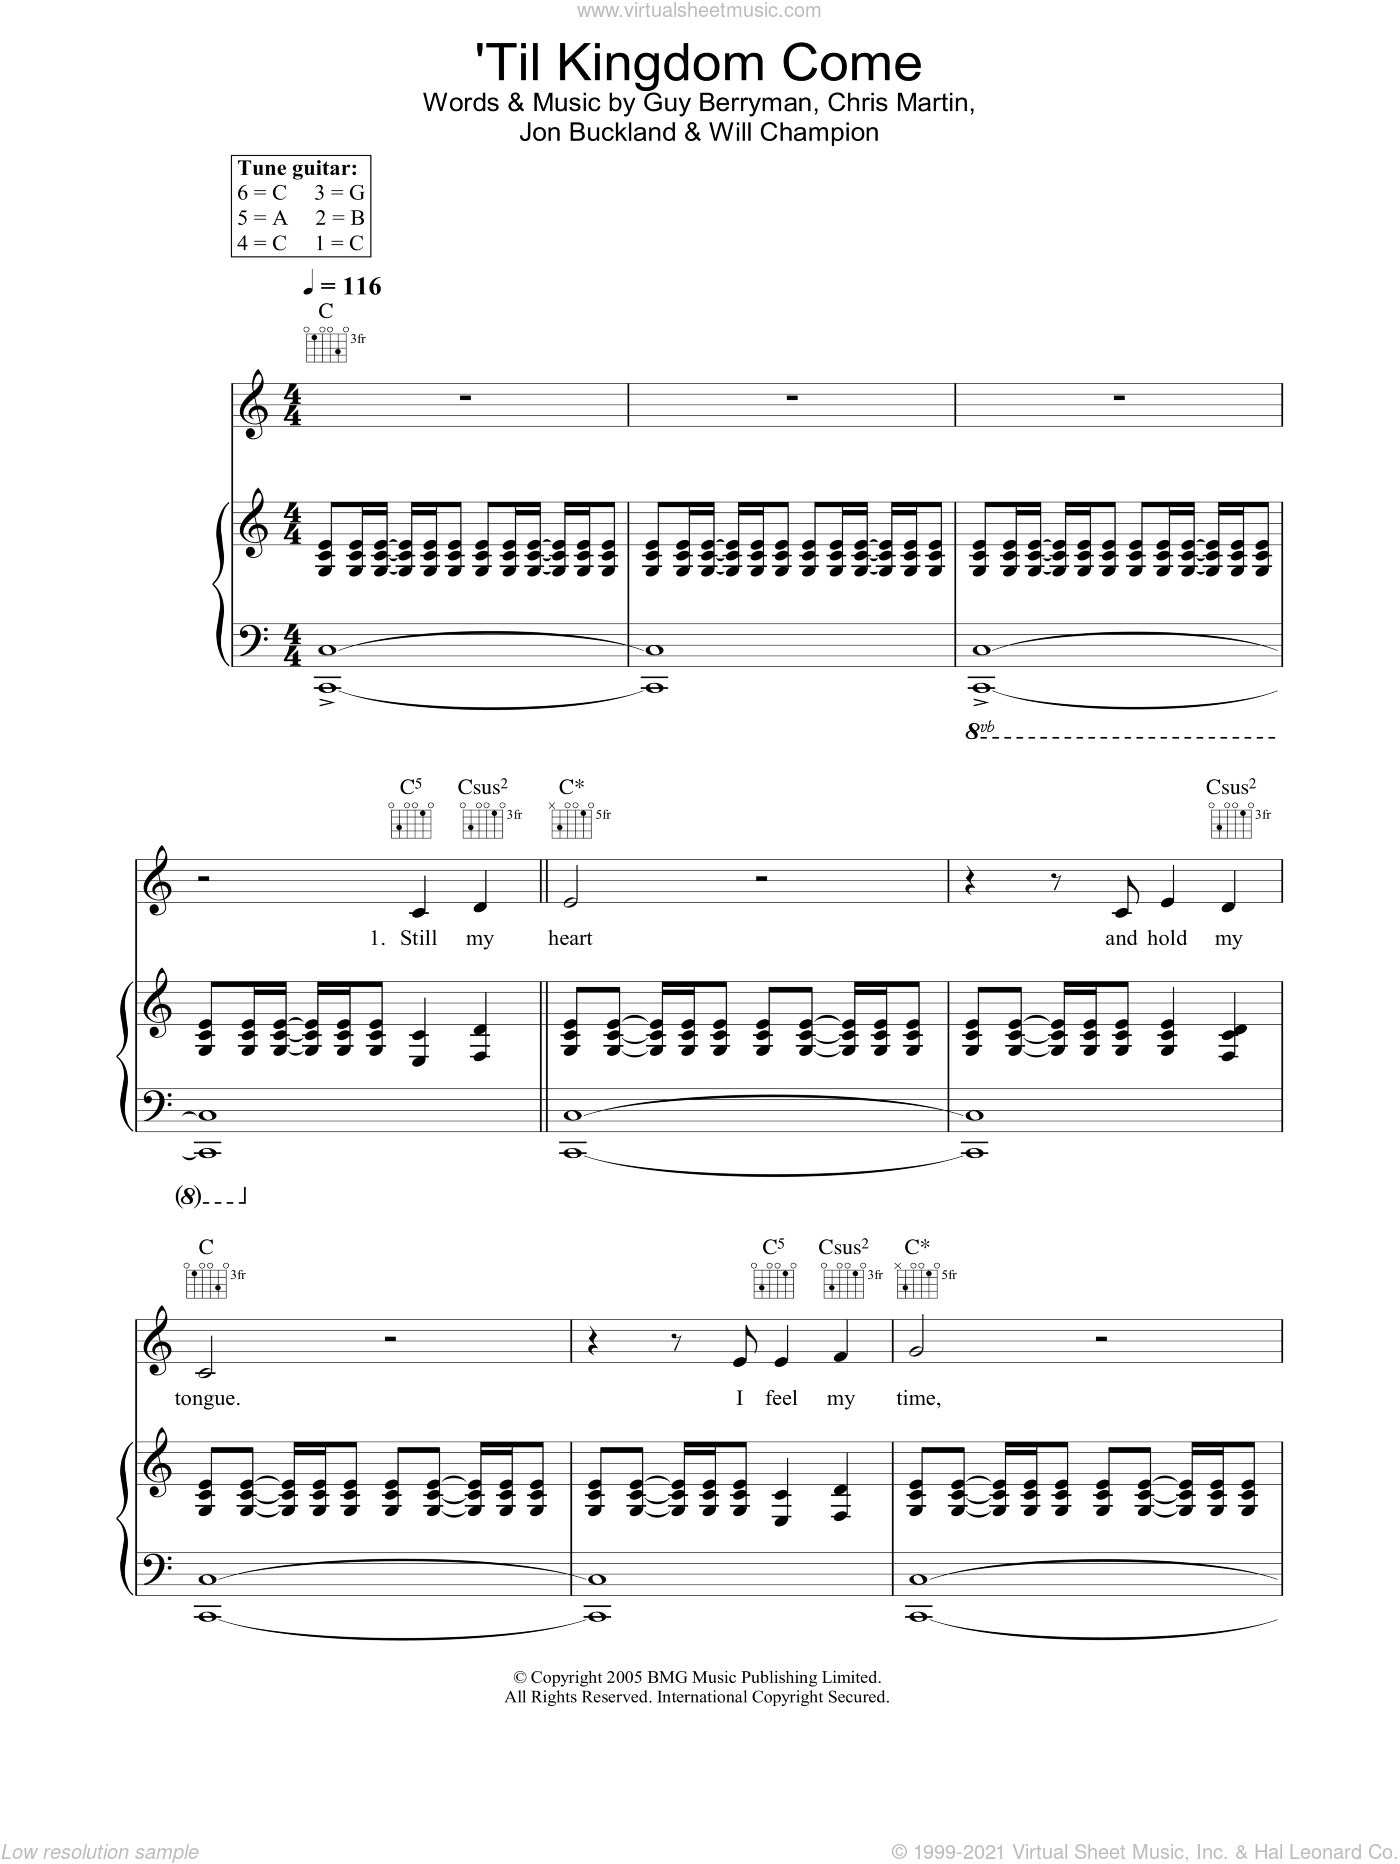 Coldplay - Til Kingdom Come sheet music for voice, piano or guitar